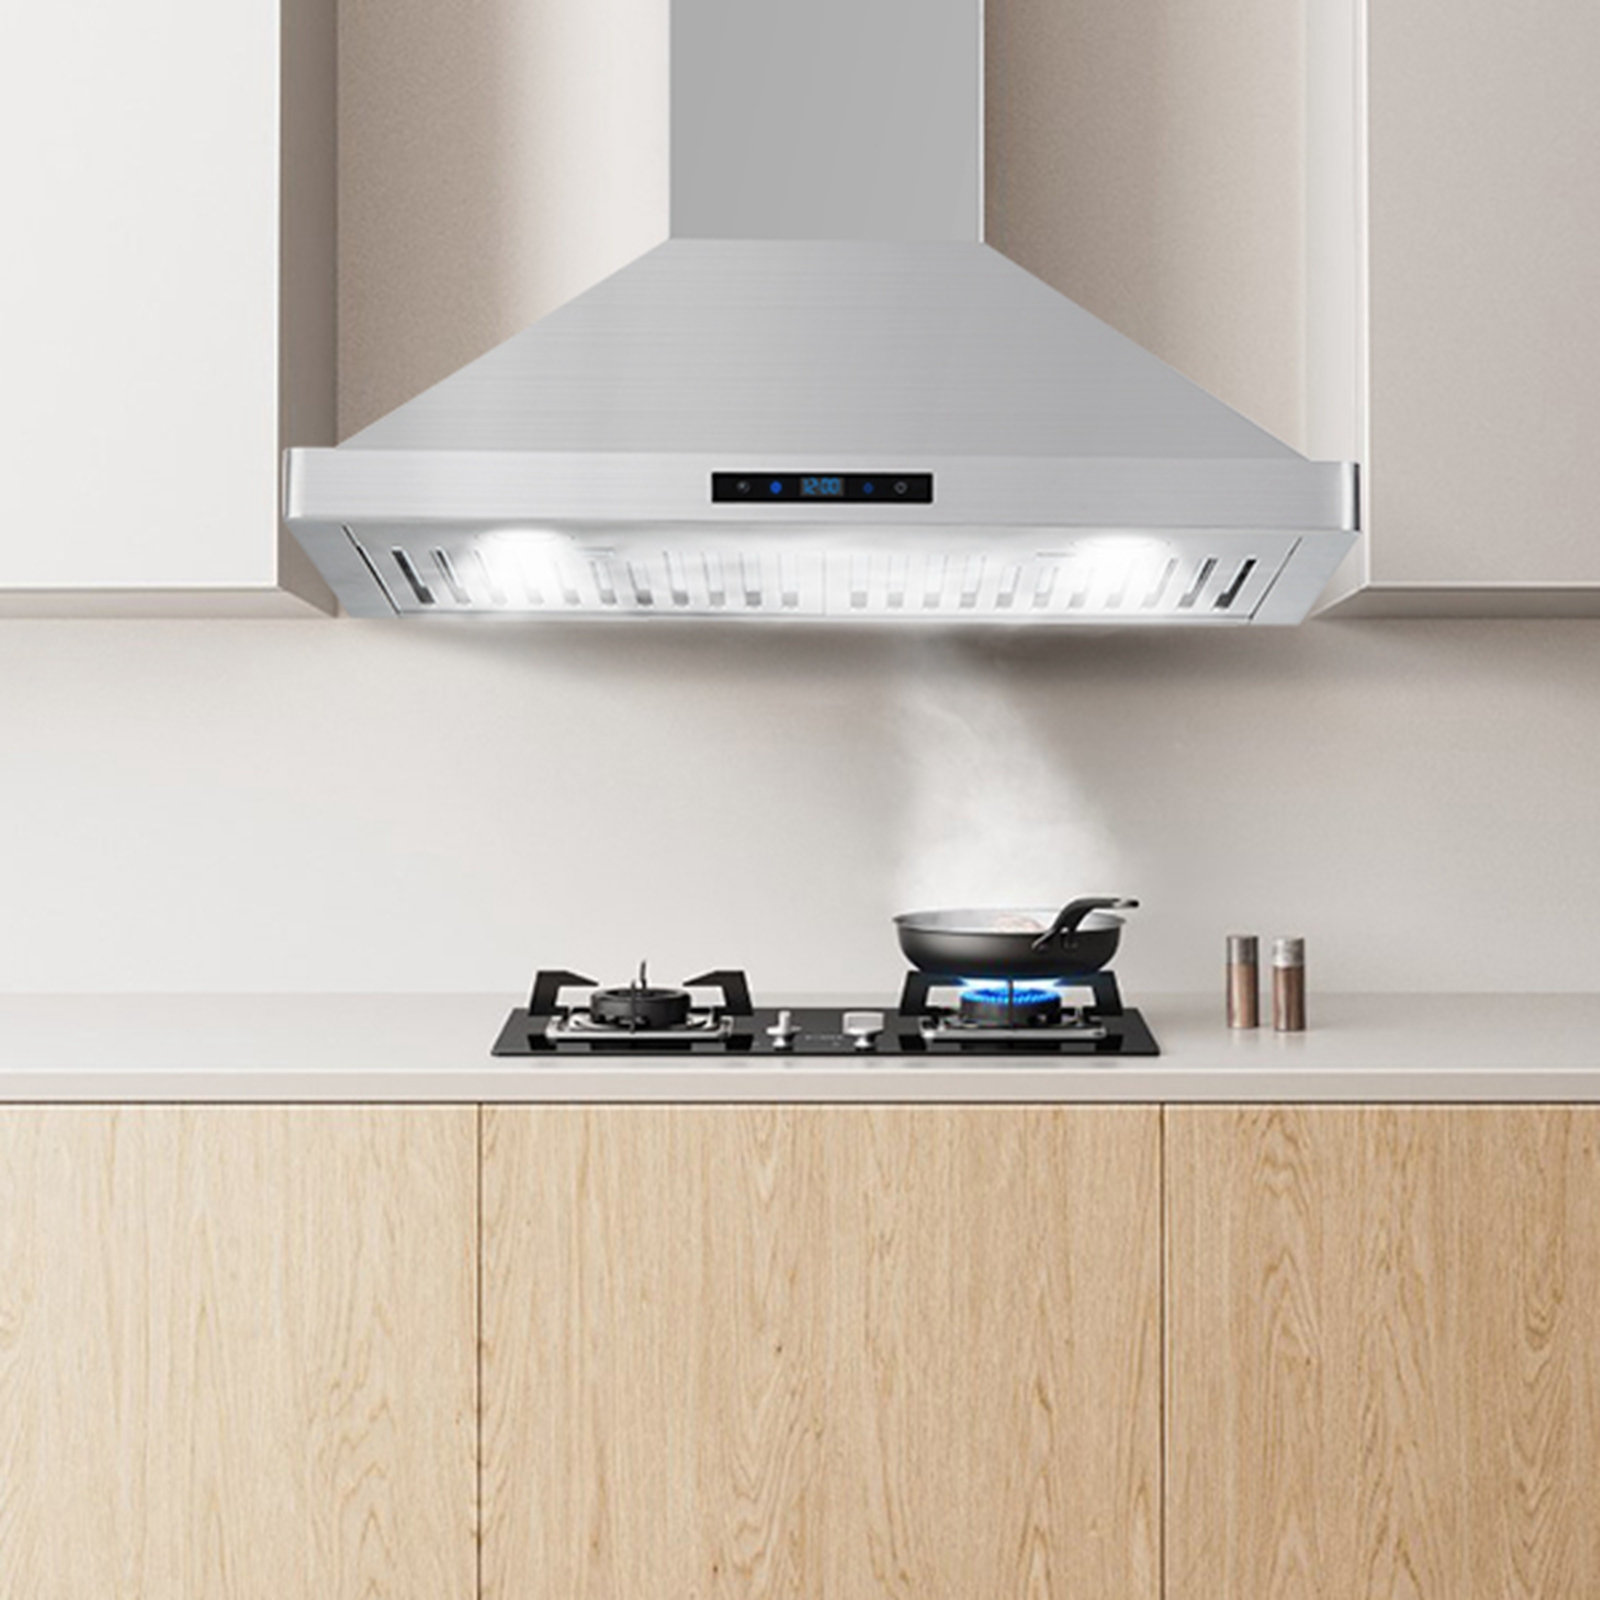 Zomagas 24 Inch Range Hood, Wall Mount Vent Hood in Stainless Steel with  Ducted/Ductless Convertible Duct, 3 Speed Exhaust Fan, Energy Saving LED